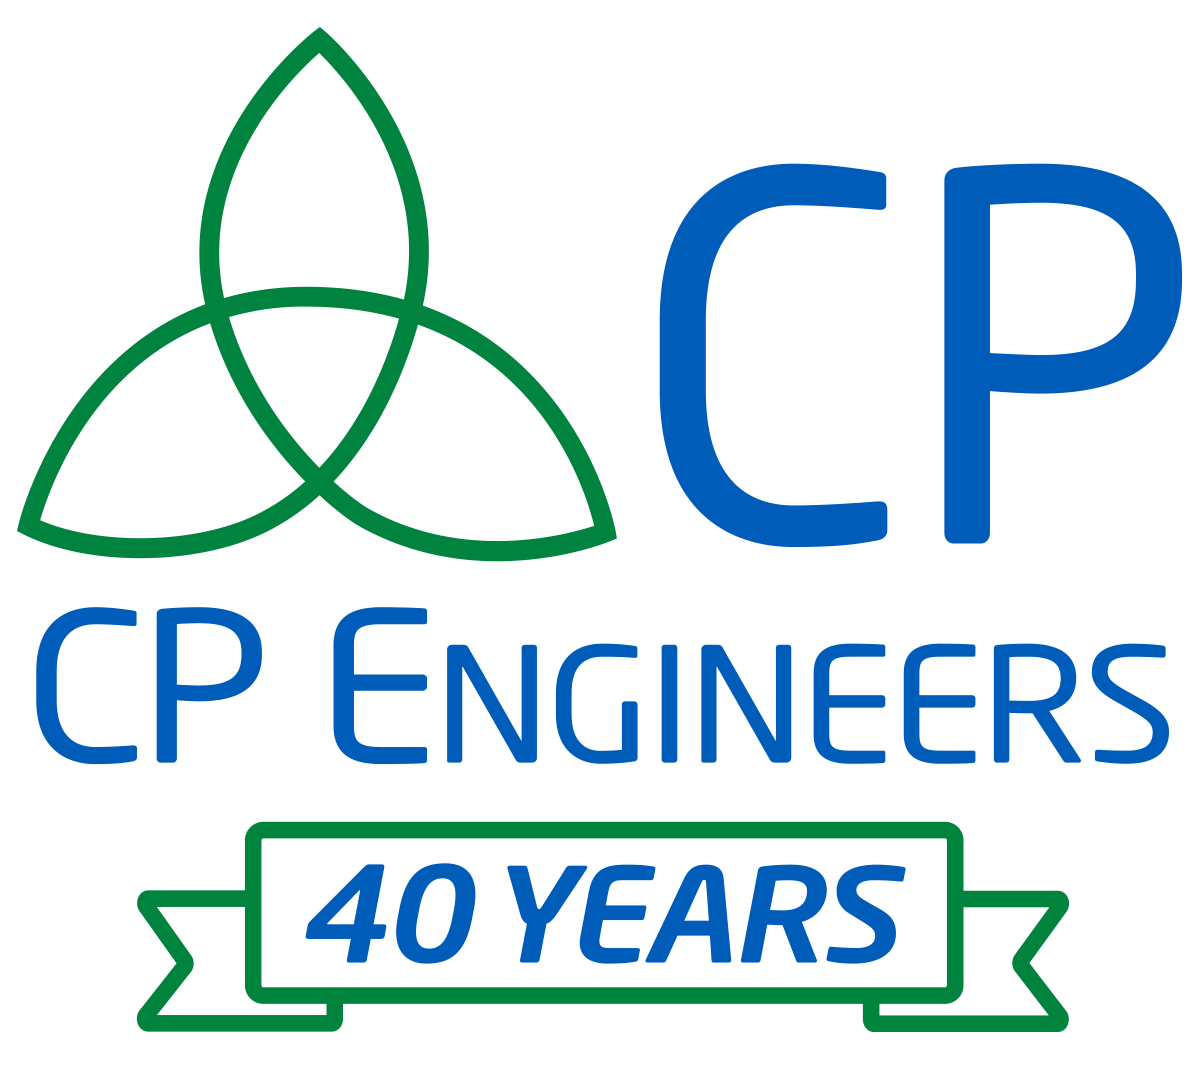 CP Engineers - Transforming challenges into opportunities since 1983